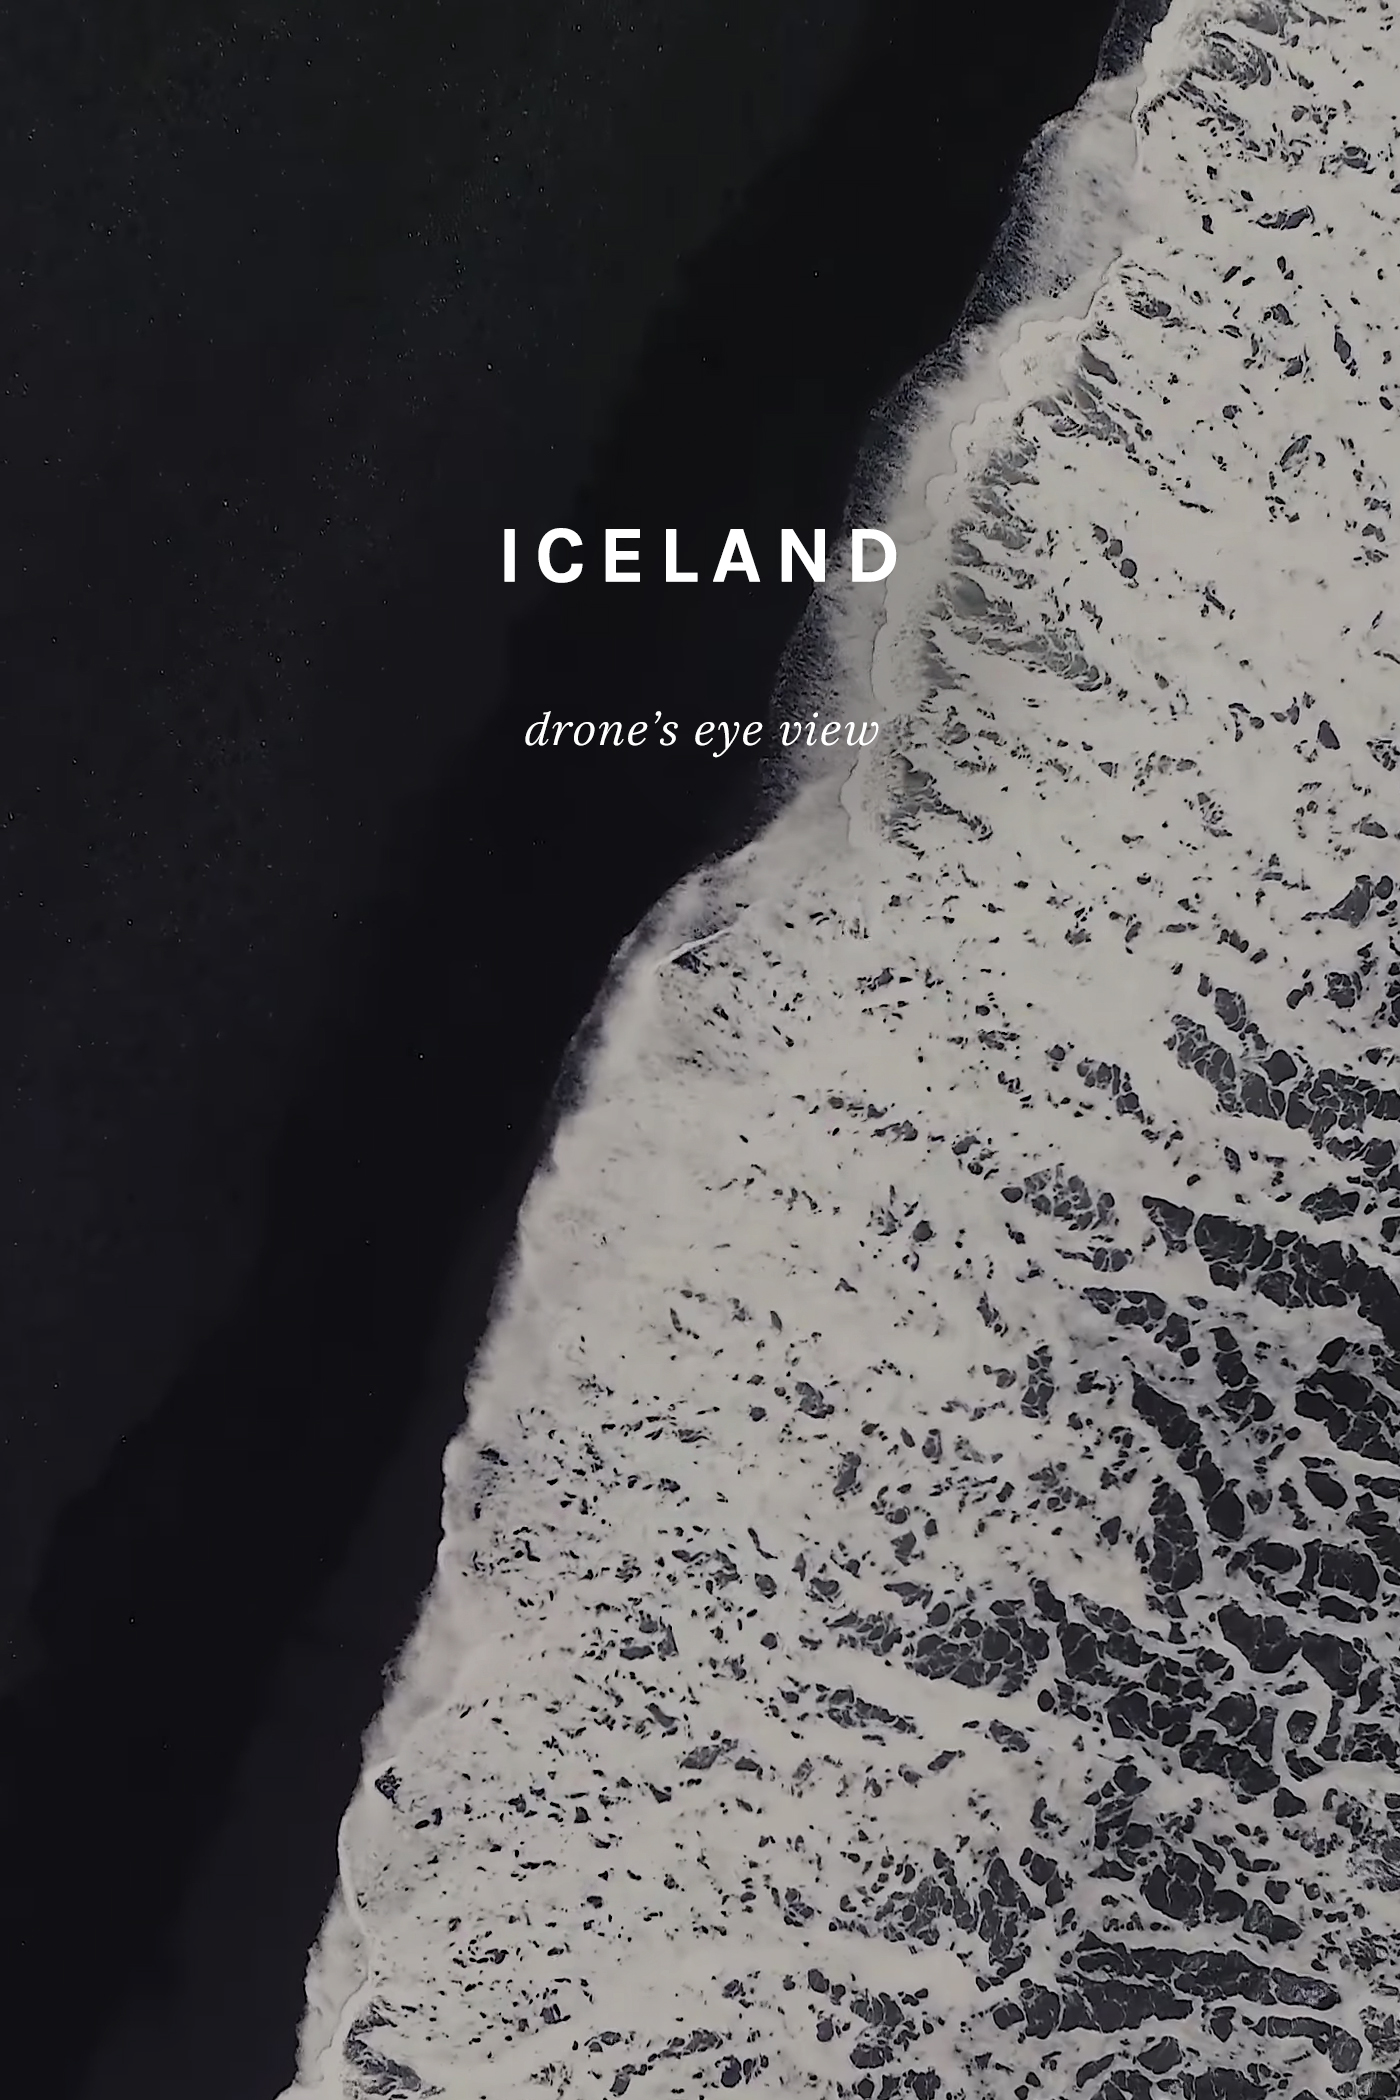 Iceland from above, a drone's view.